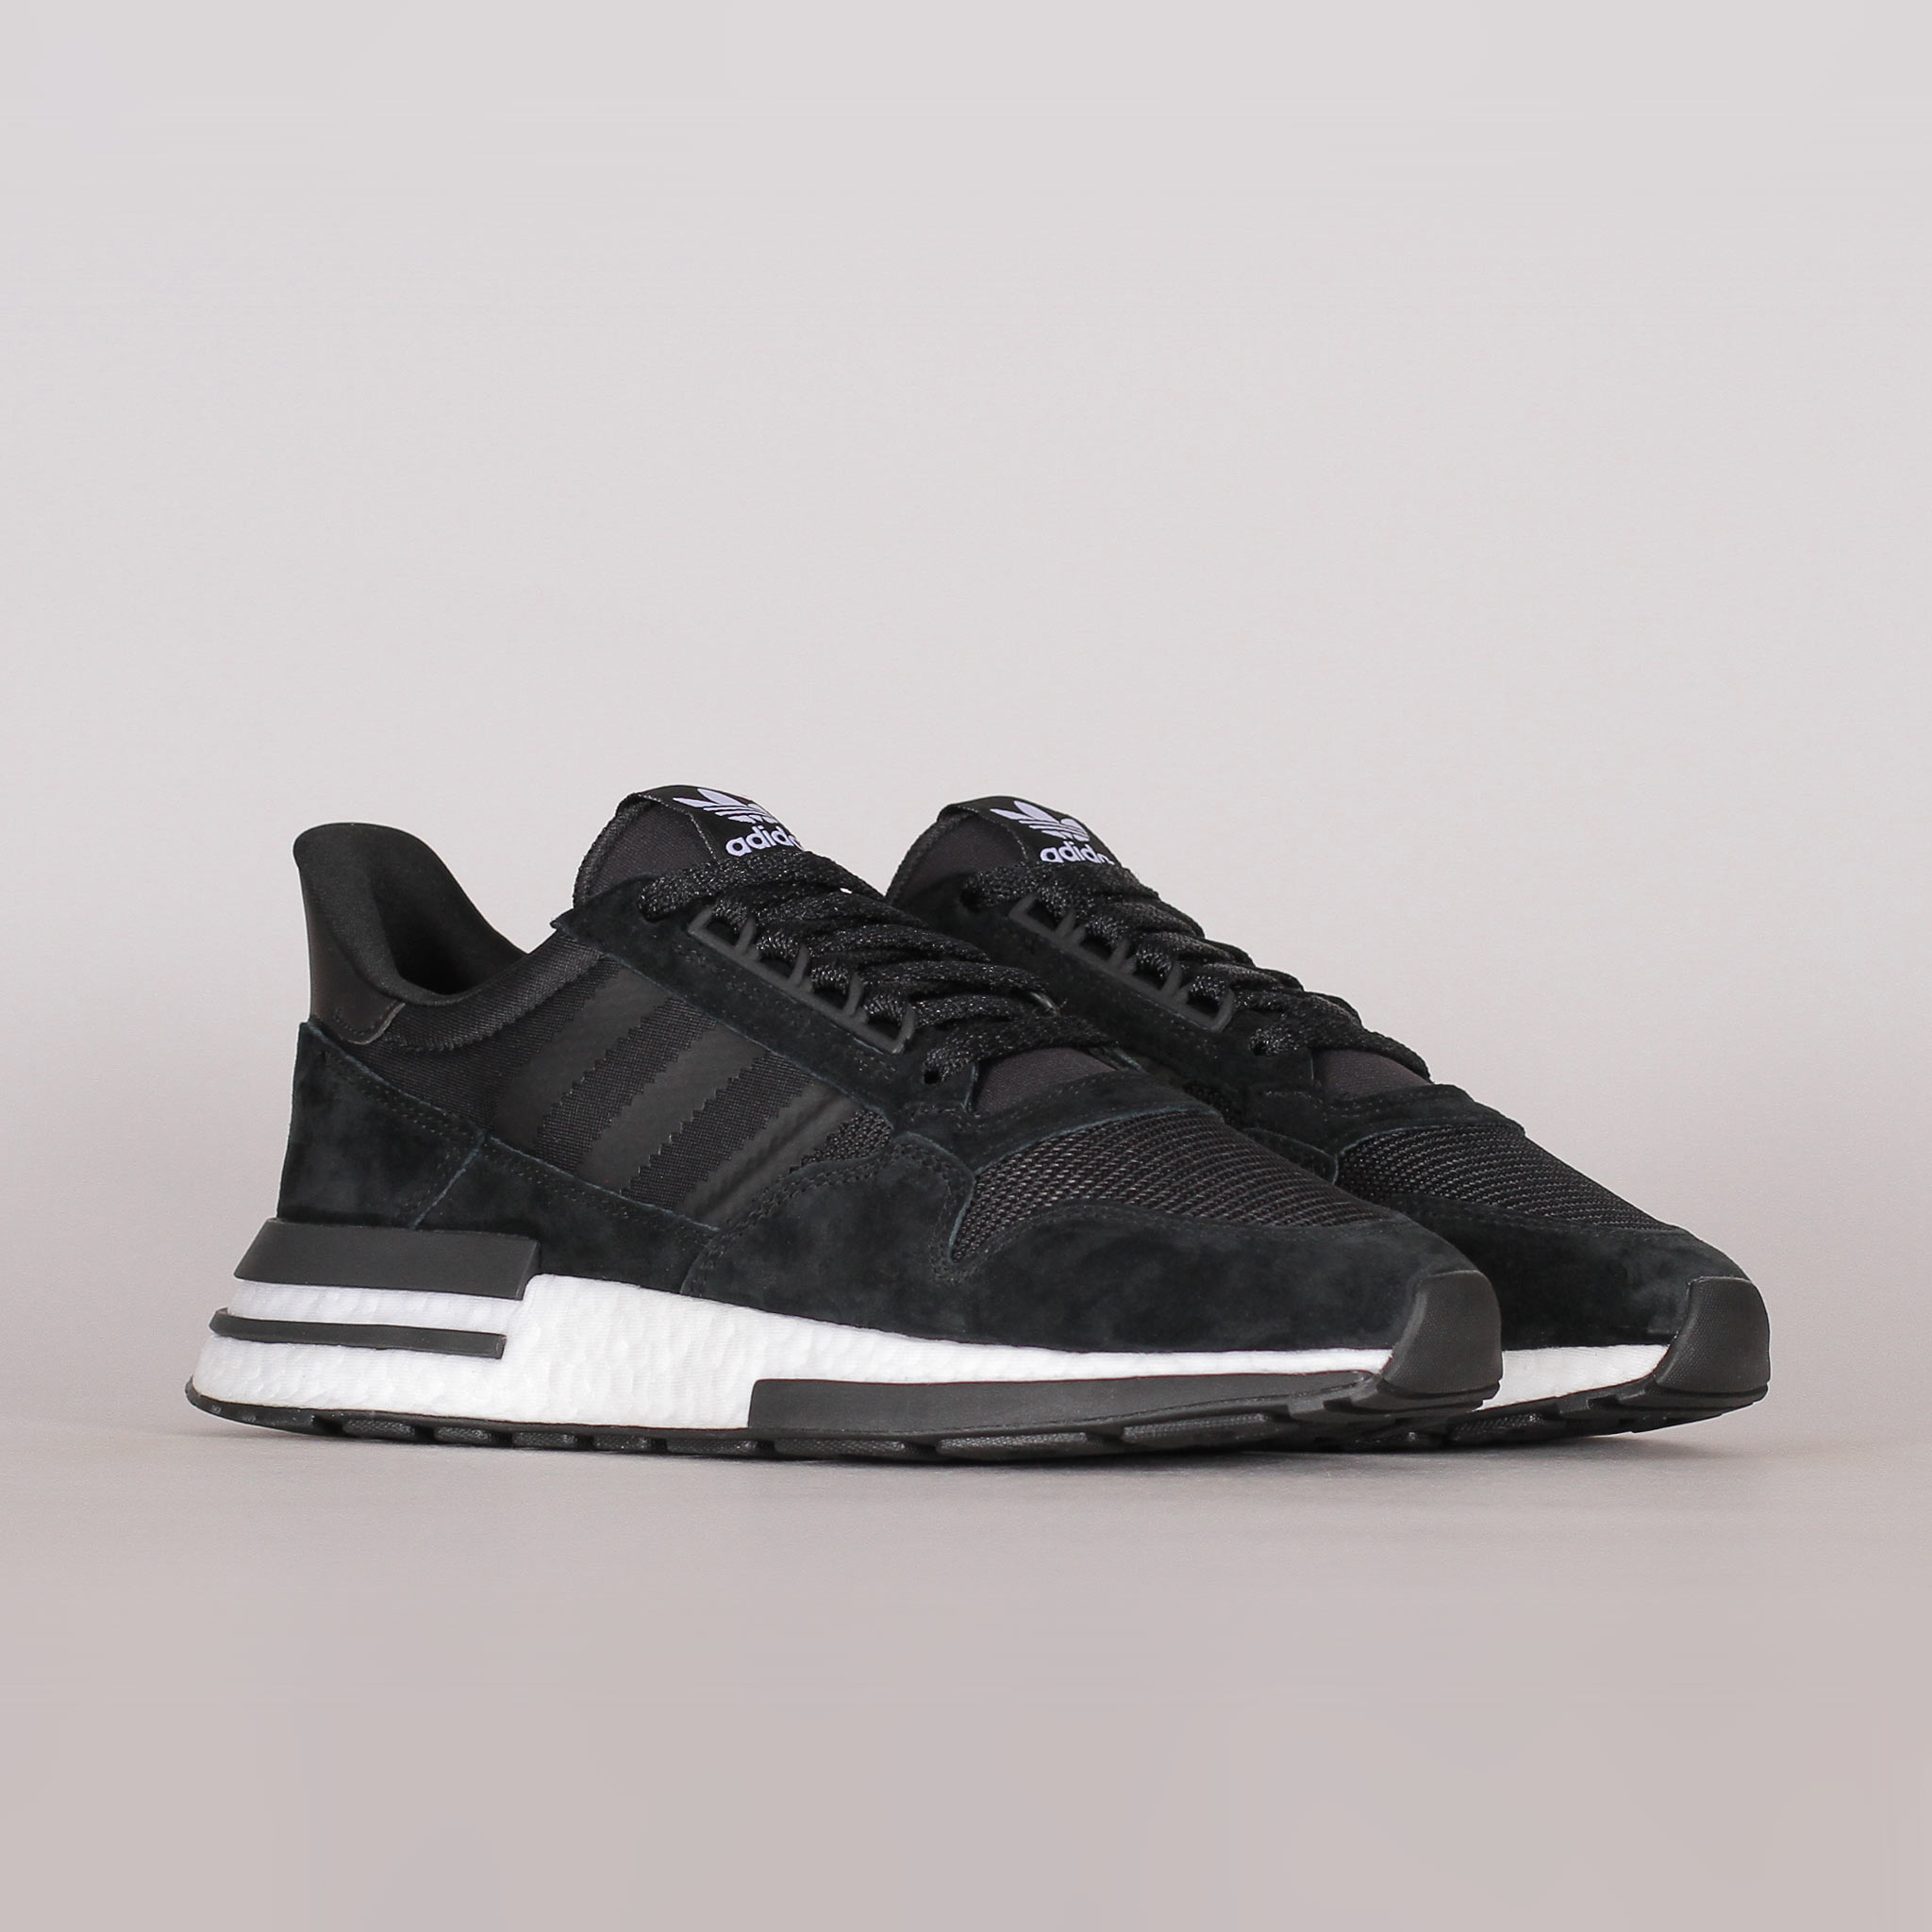 adidas originals zx 500 rm trainers in black